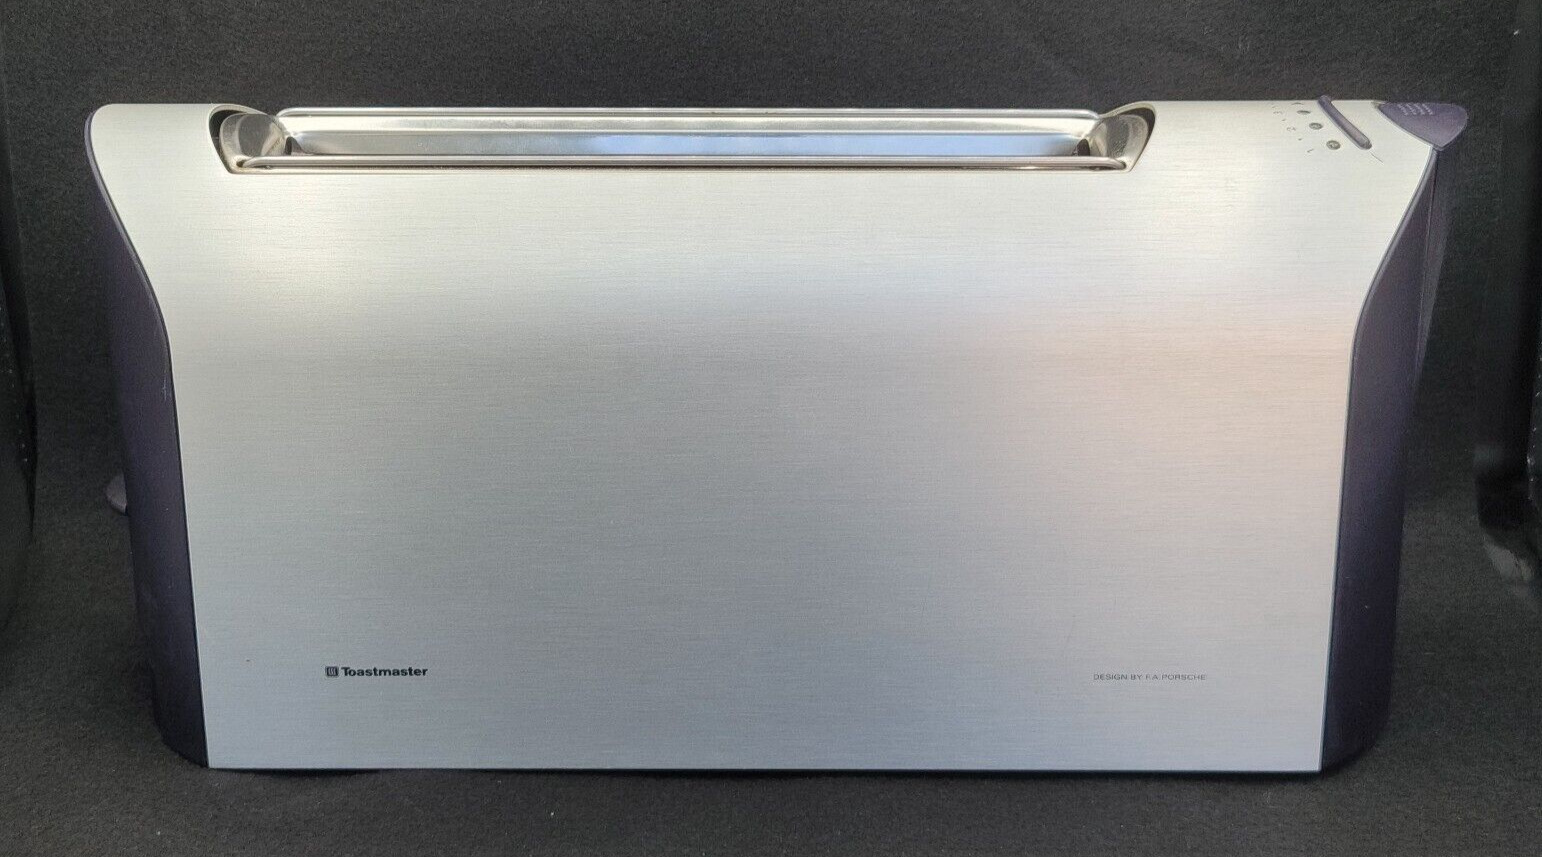 F. A. Porsche Designed Toastmaster 1079P Made in Germany 120V Brushed Aluminium